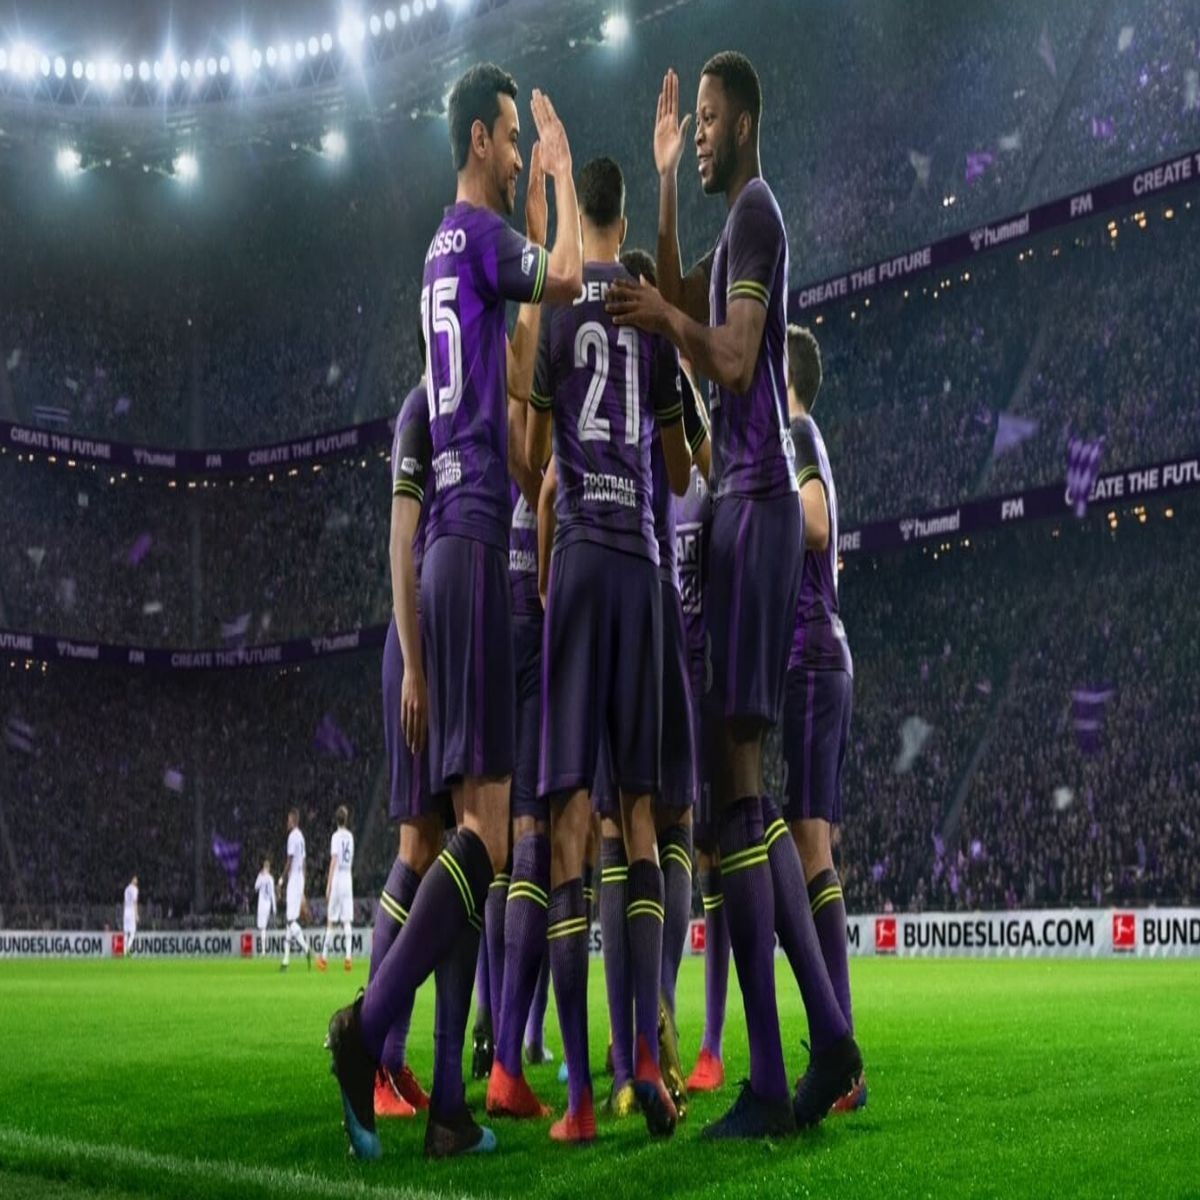 Nintendo Everything on X: Football Manager 2022 Touch has just